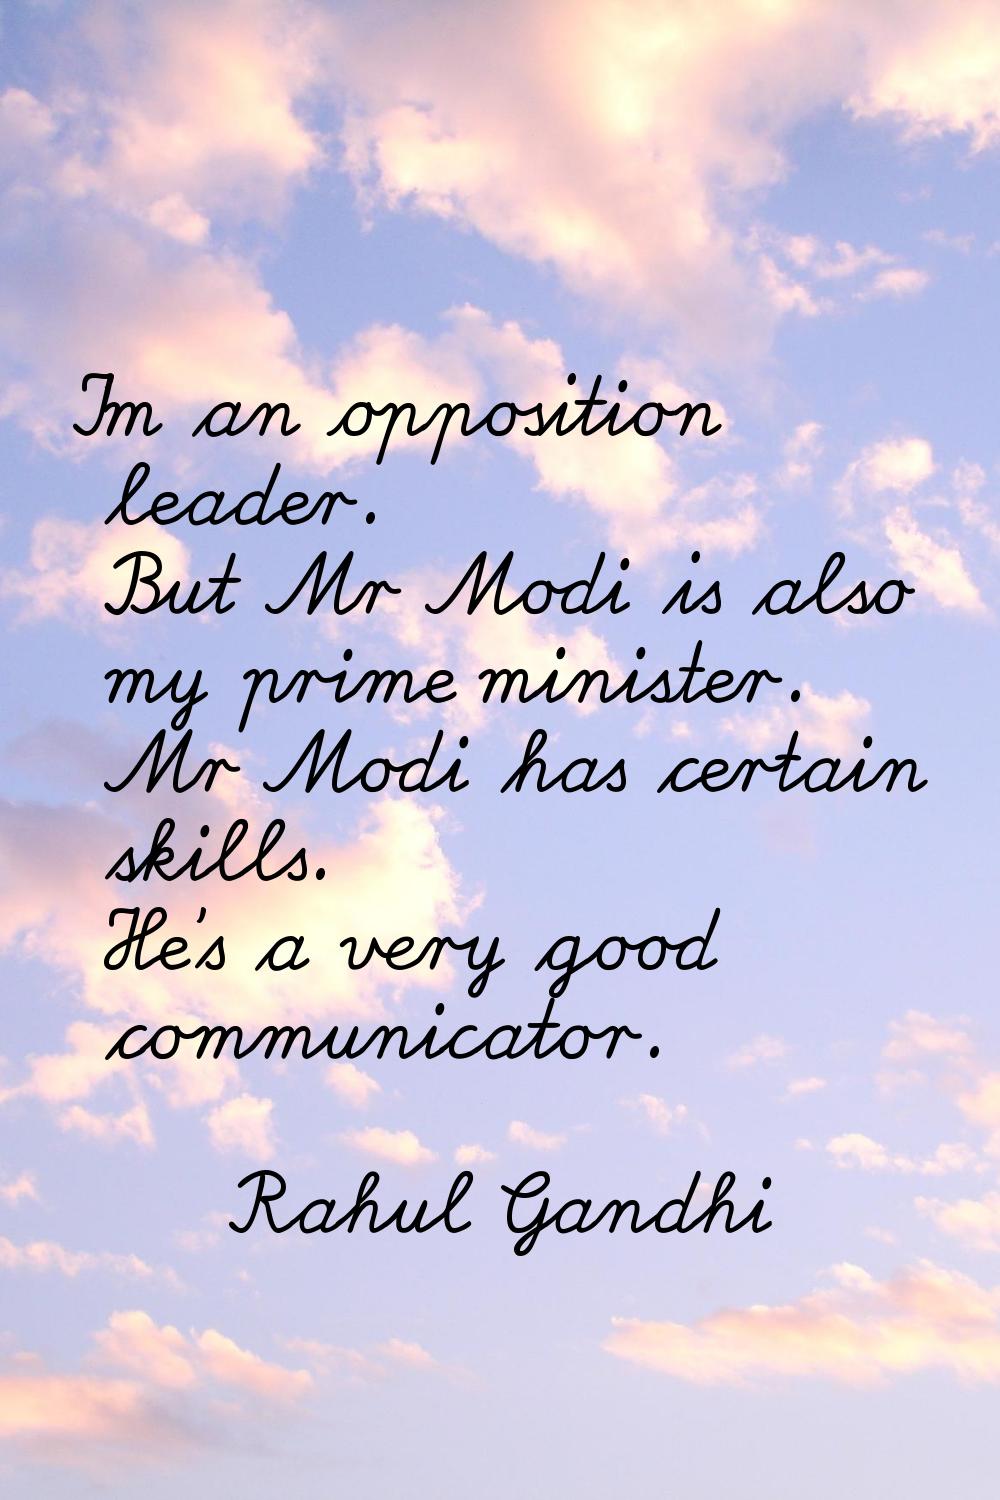 I'm an opposition leader. But Mr Modi is also my prime minister. Mr Modi has certain skills. He's a